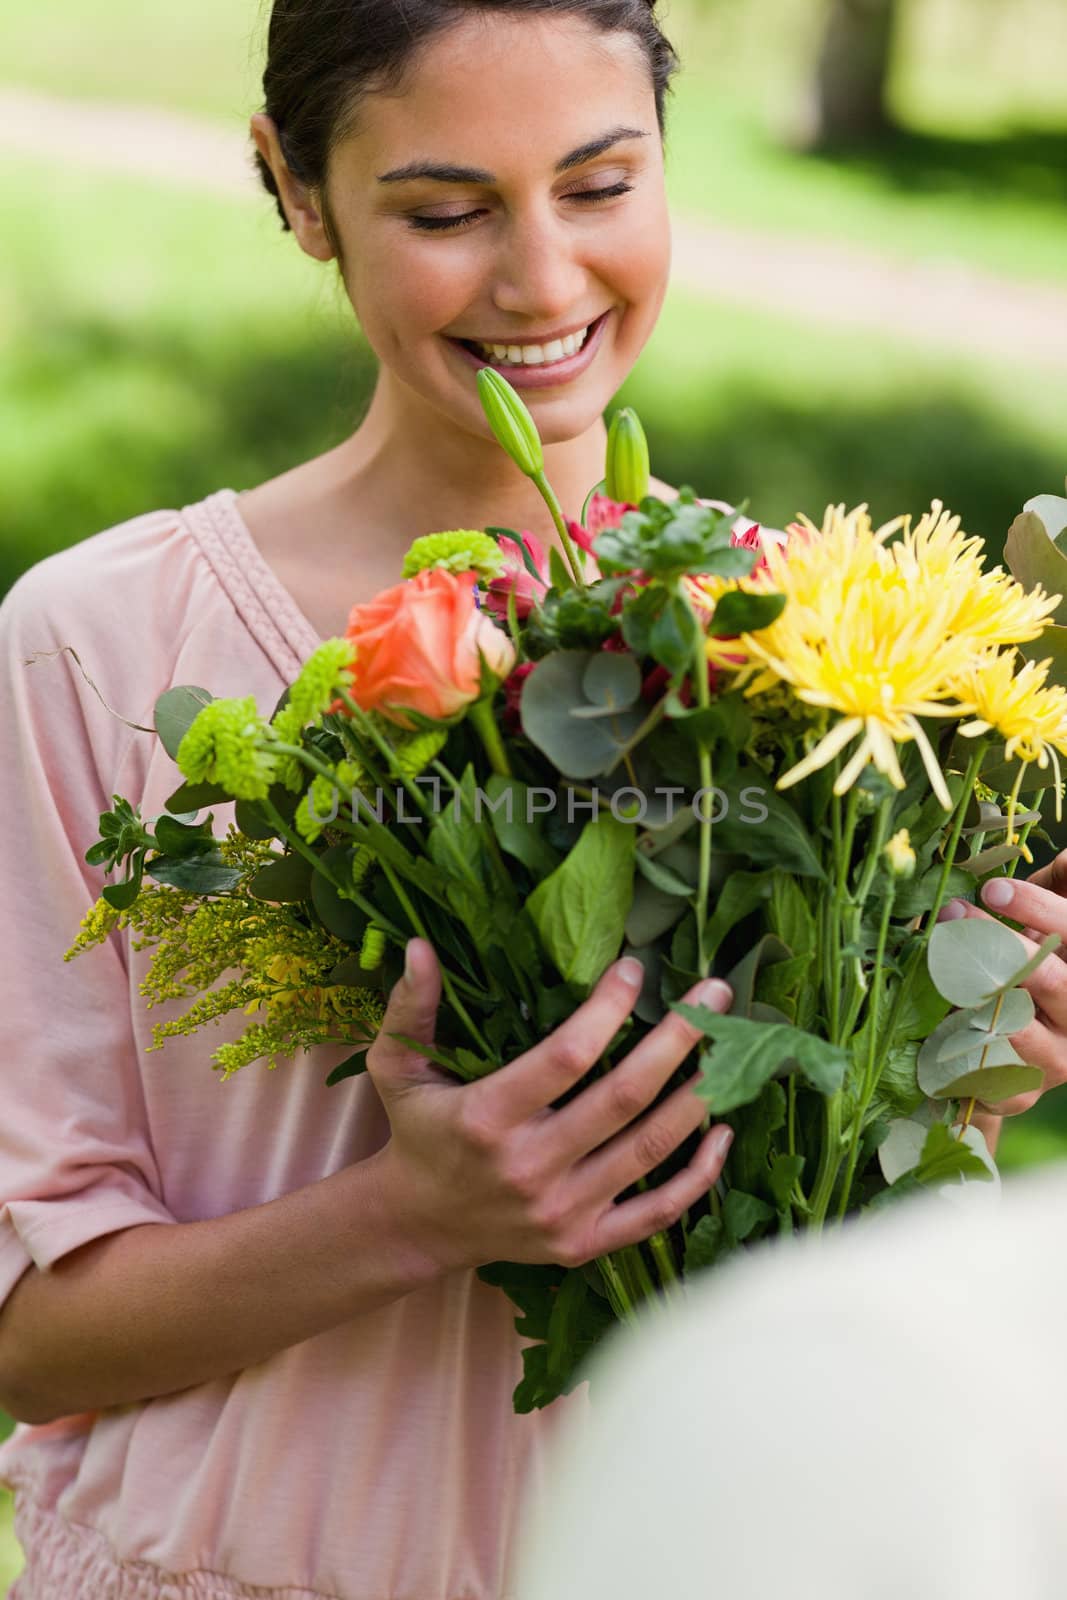 Woman looking at flowers which have been given to her by Wavebreakmedia